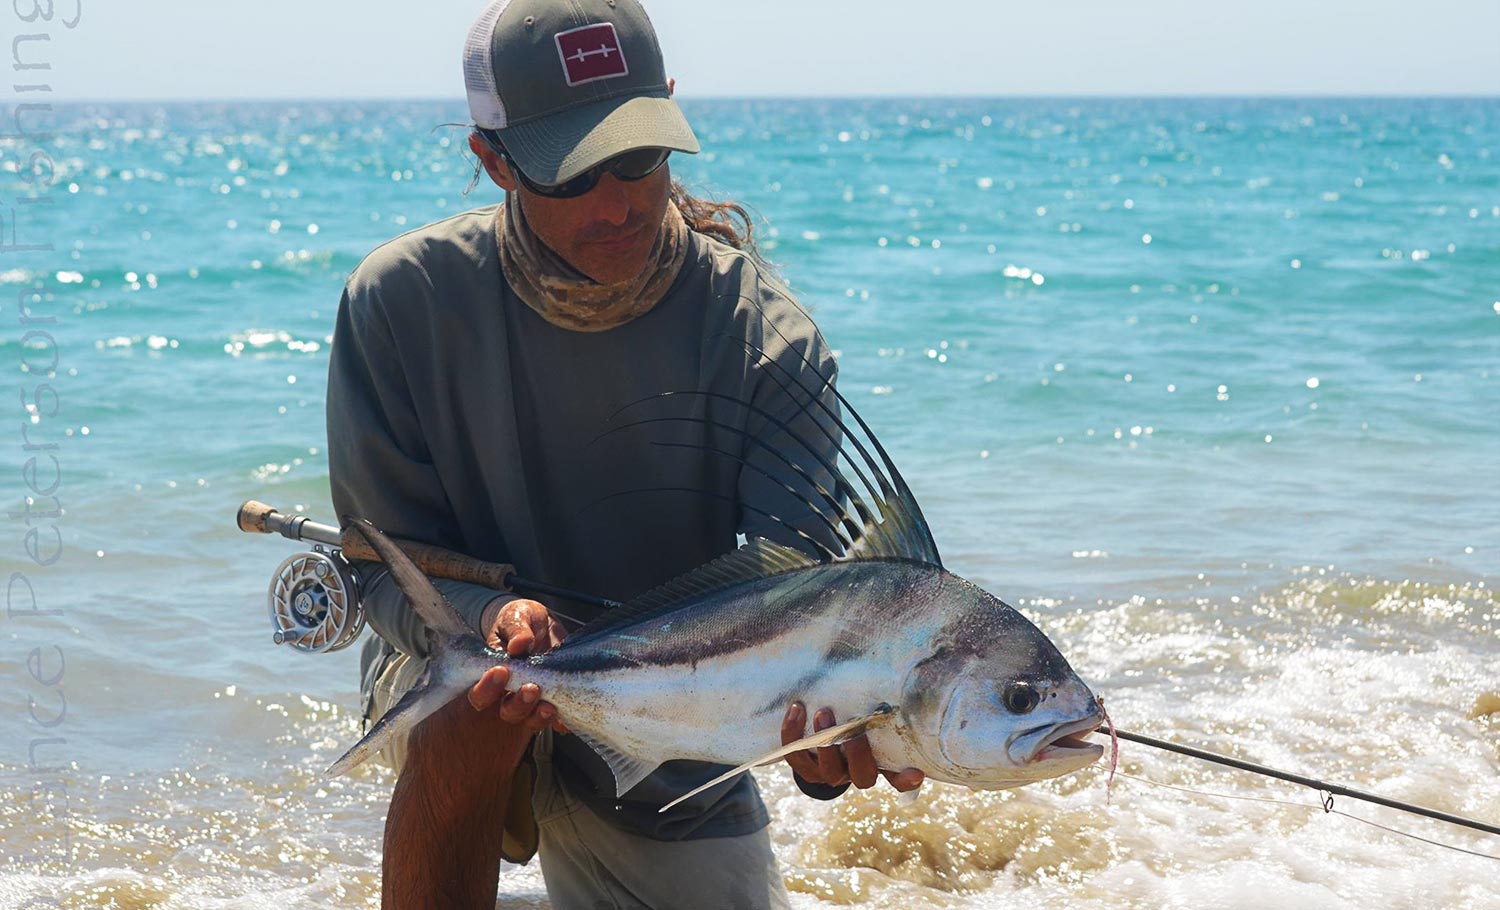 East Cape MX fishing - Fly Fishing, Gink and Gasoline